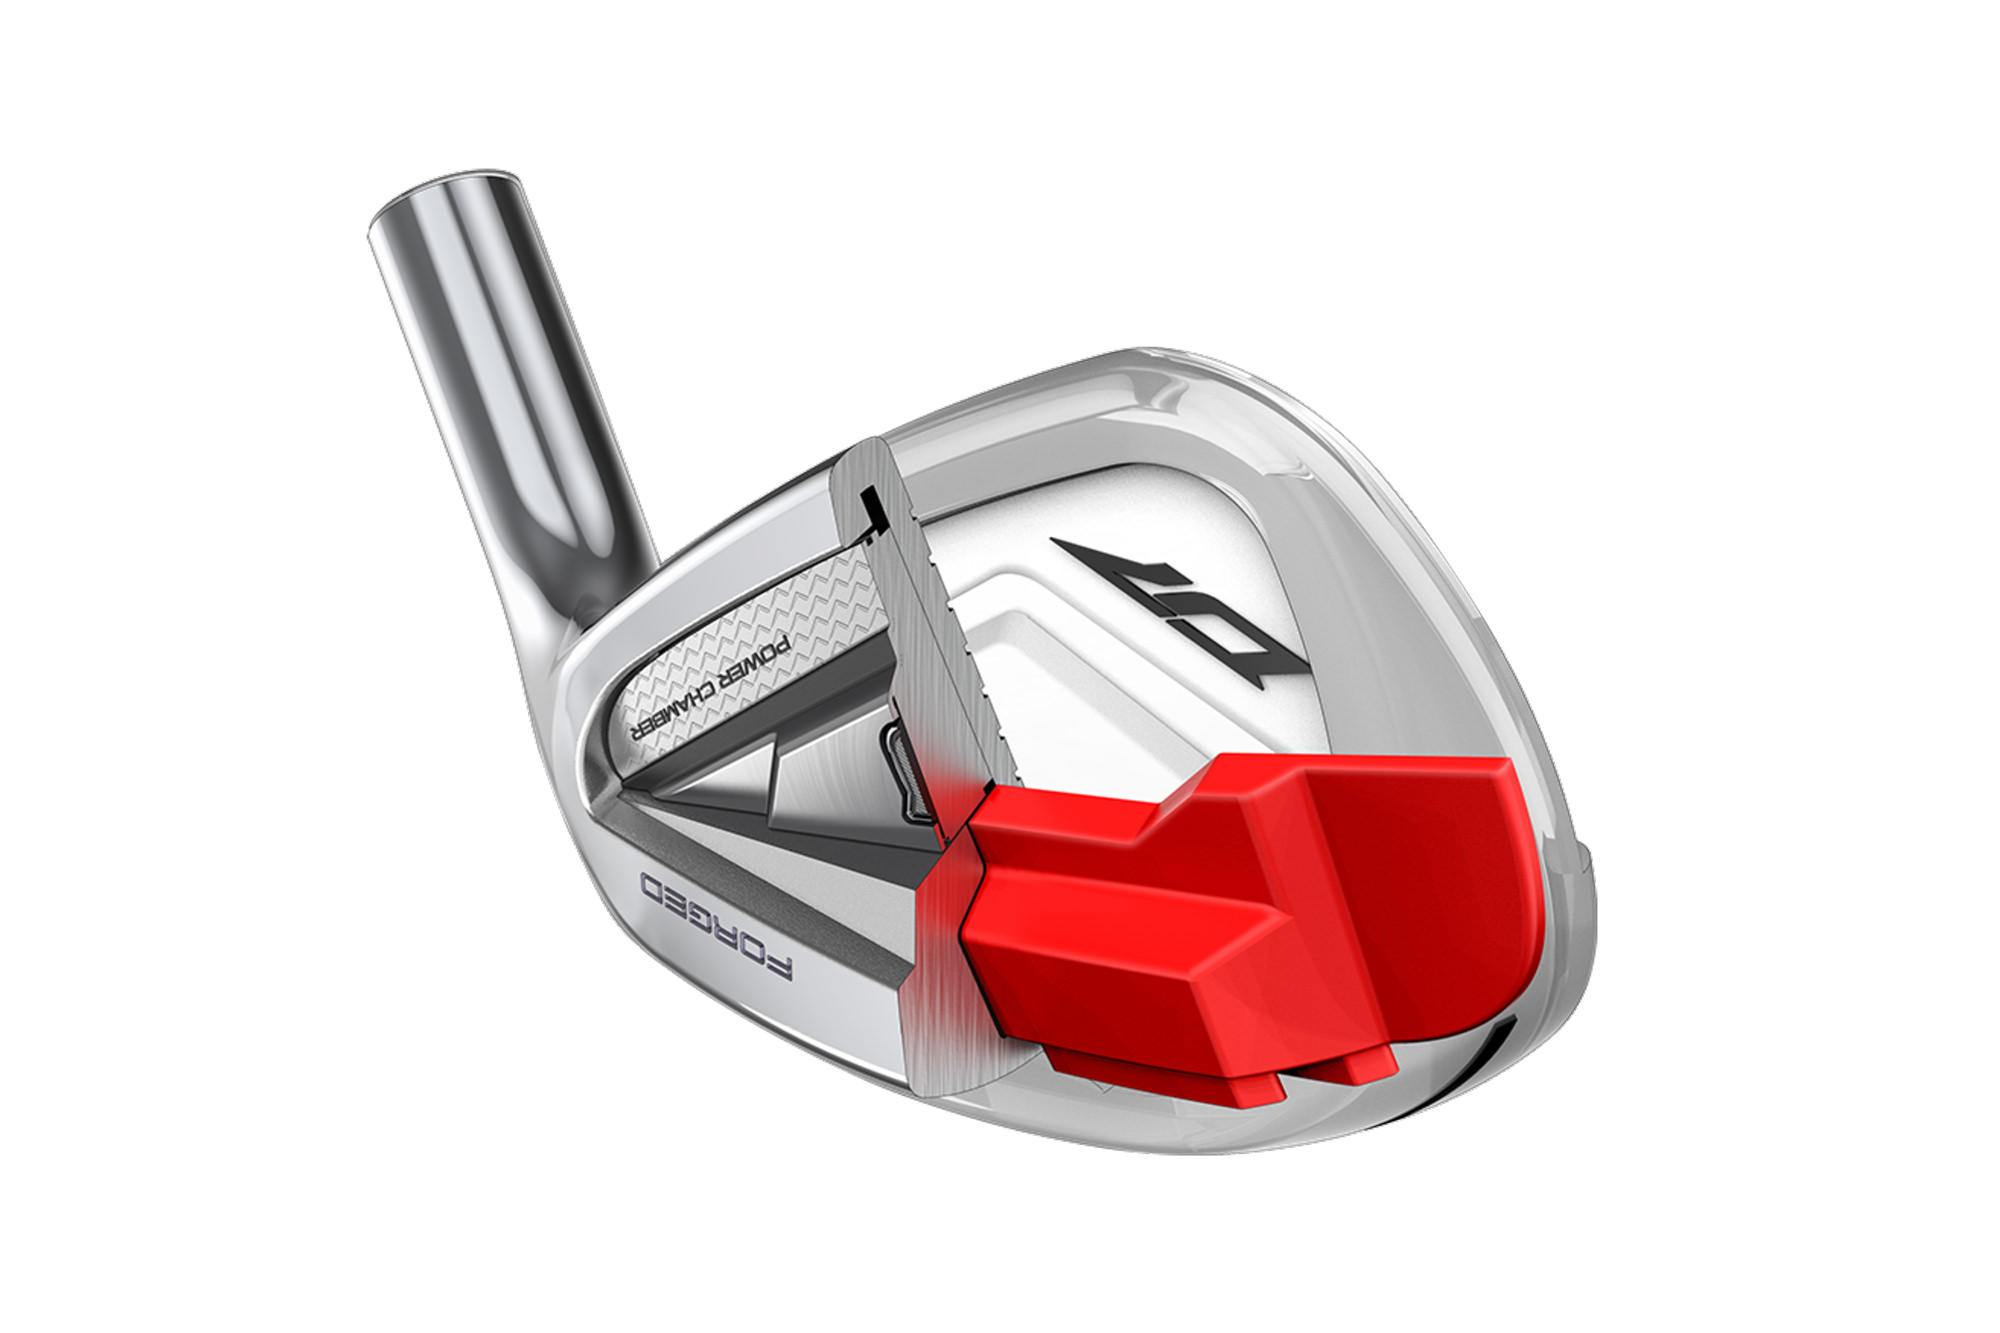 Wilson D7 Forged irons